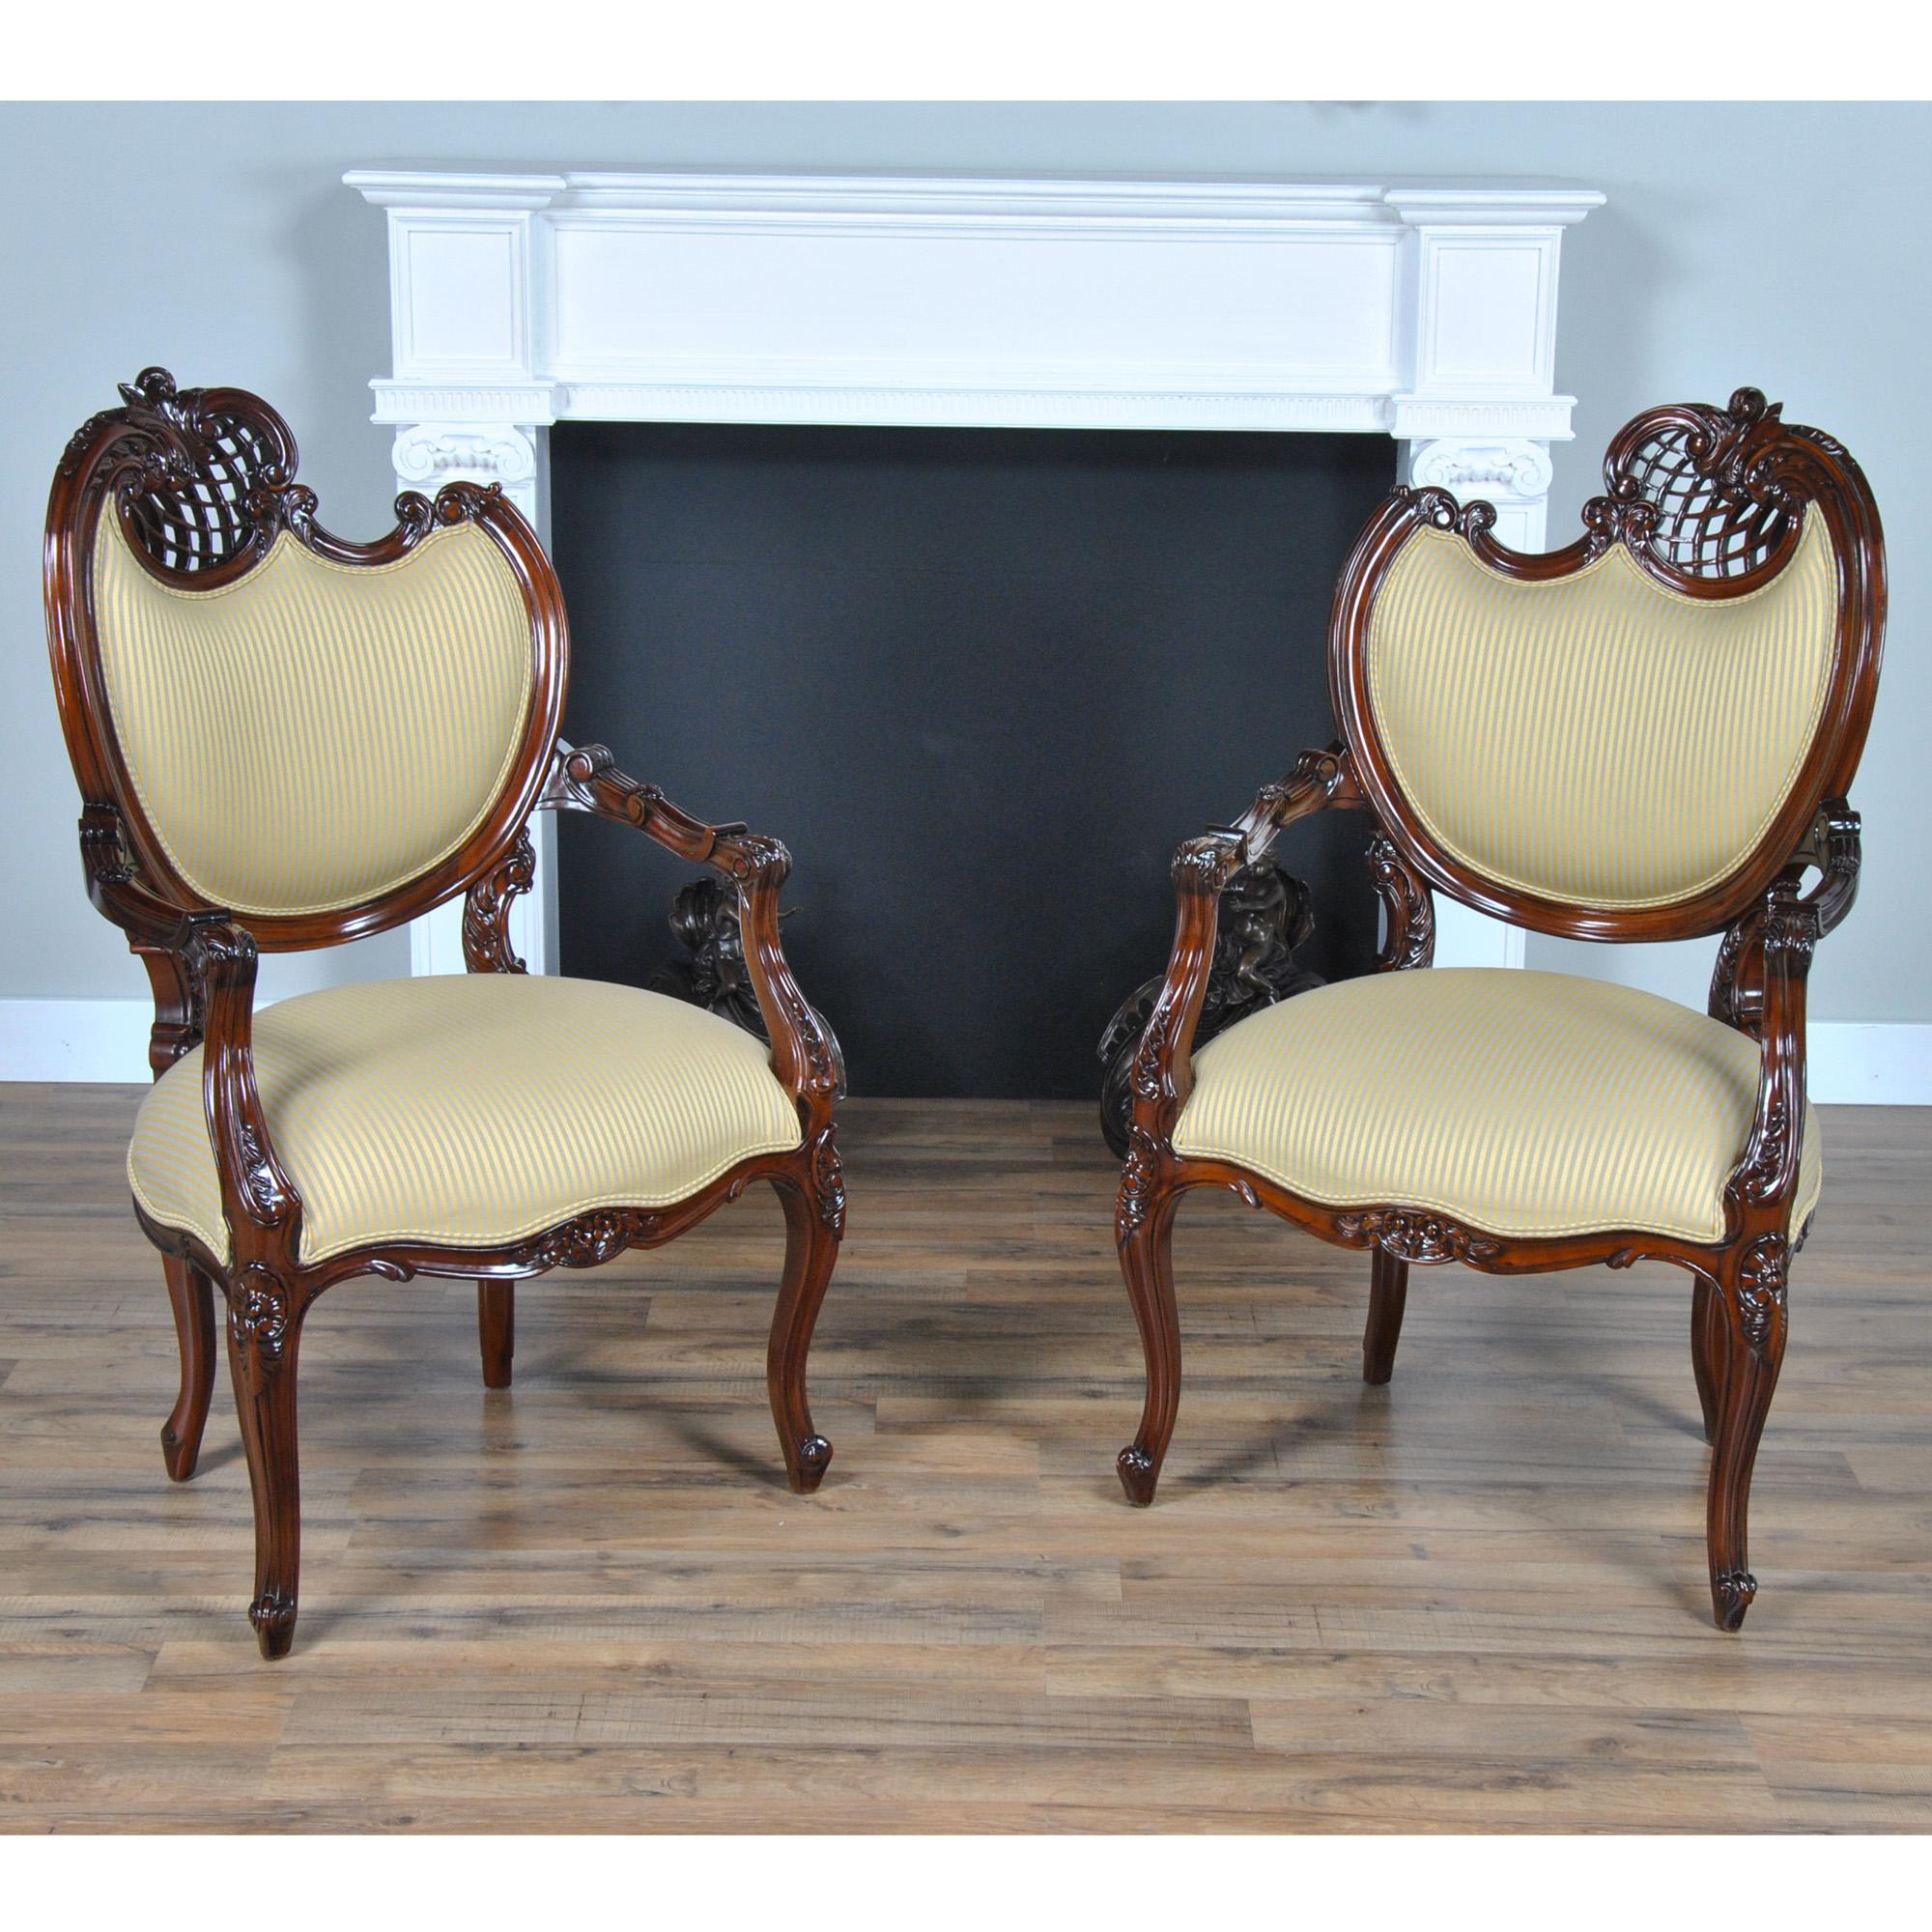 The Left Fireside Chair is a French style living room chair with an asymmetrical back, the higher side of the chair being on a persons left when facing the chair from the front side. This version of fireside chair is completely hand carved from